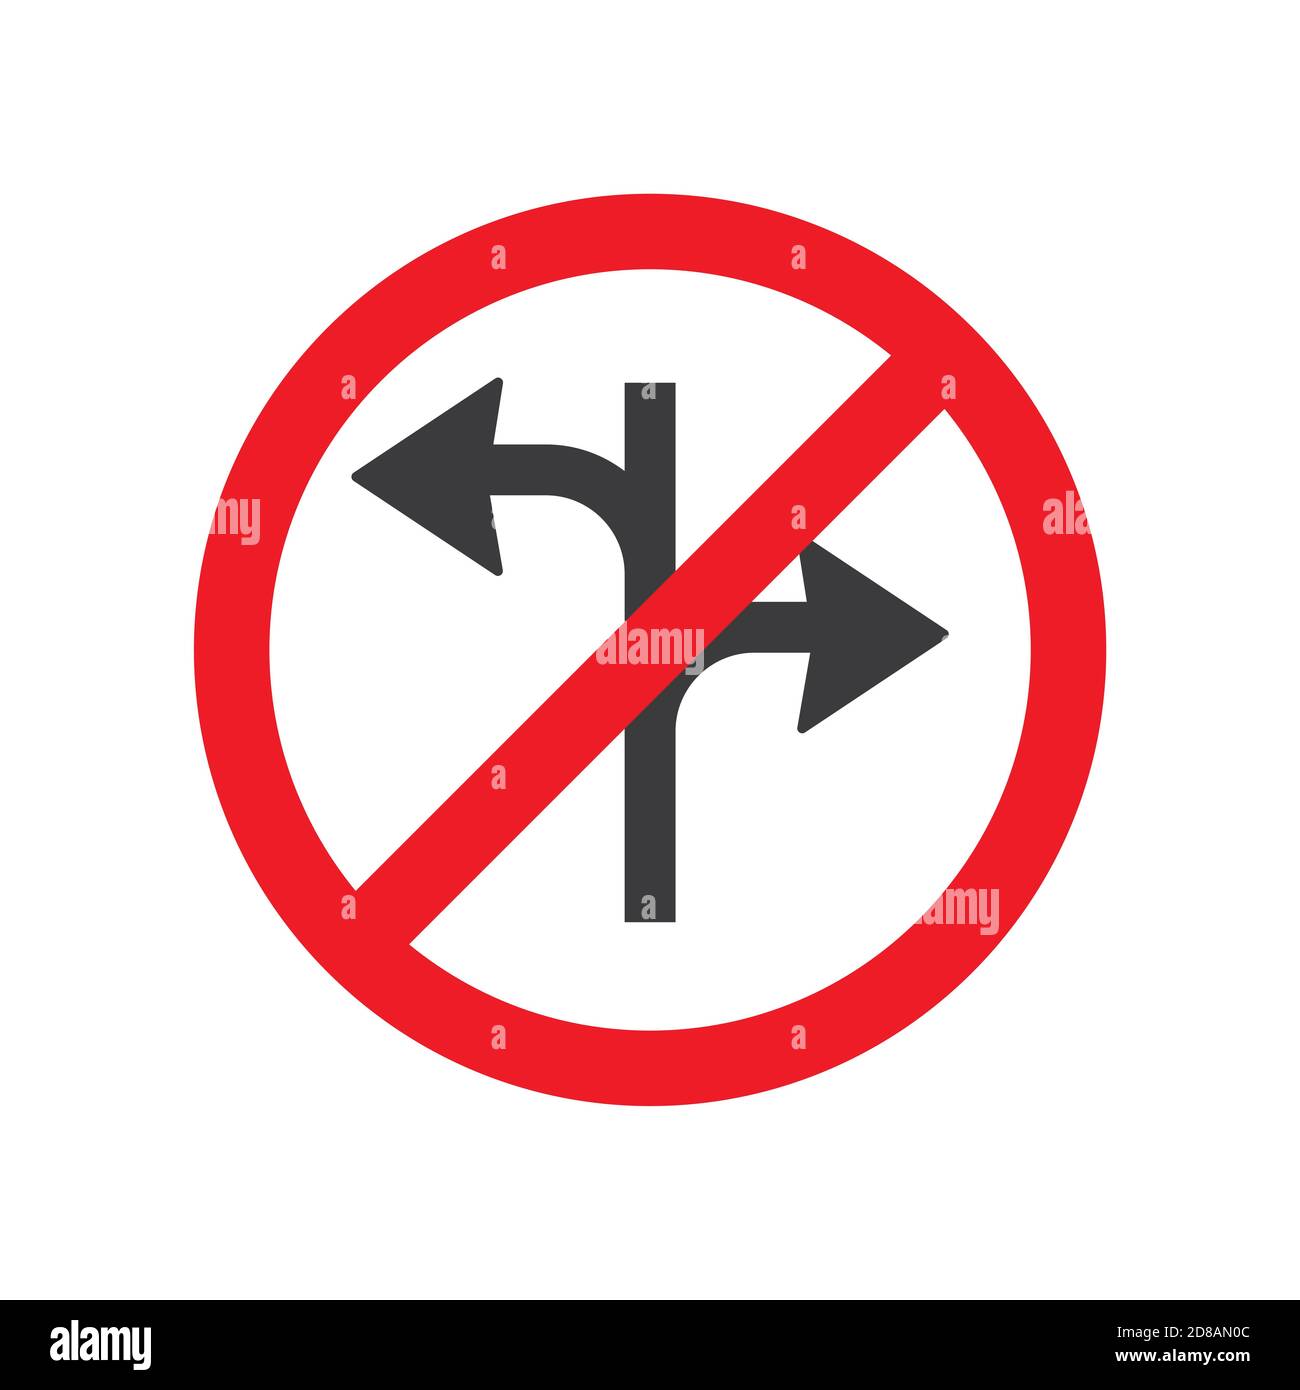 Turn right or turn left glyph icon road sign vector illustration in white background. Turn right or turn left icon sign Stock Vector